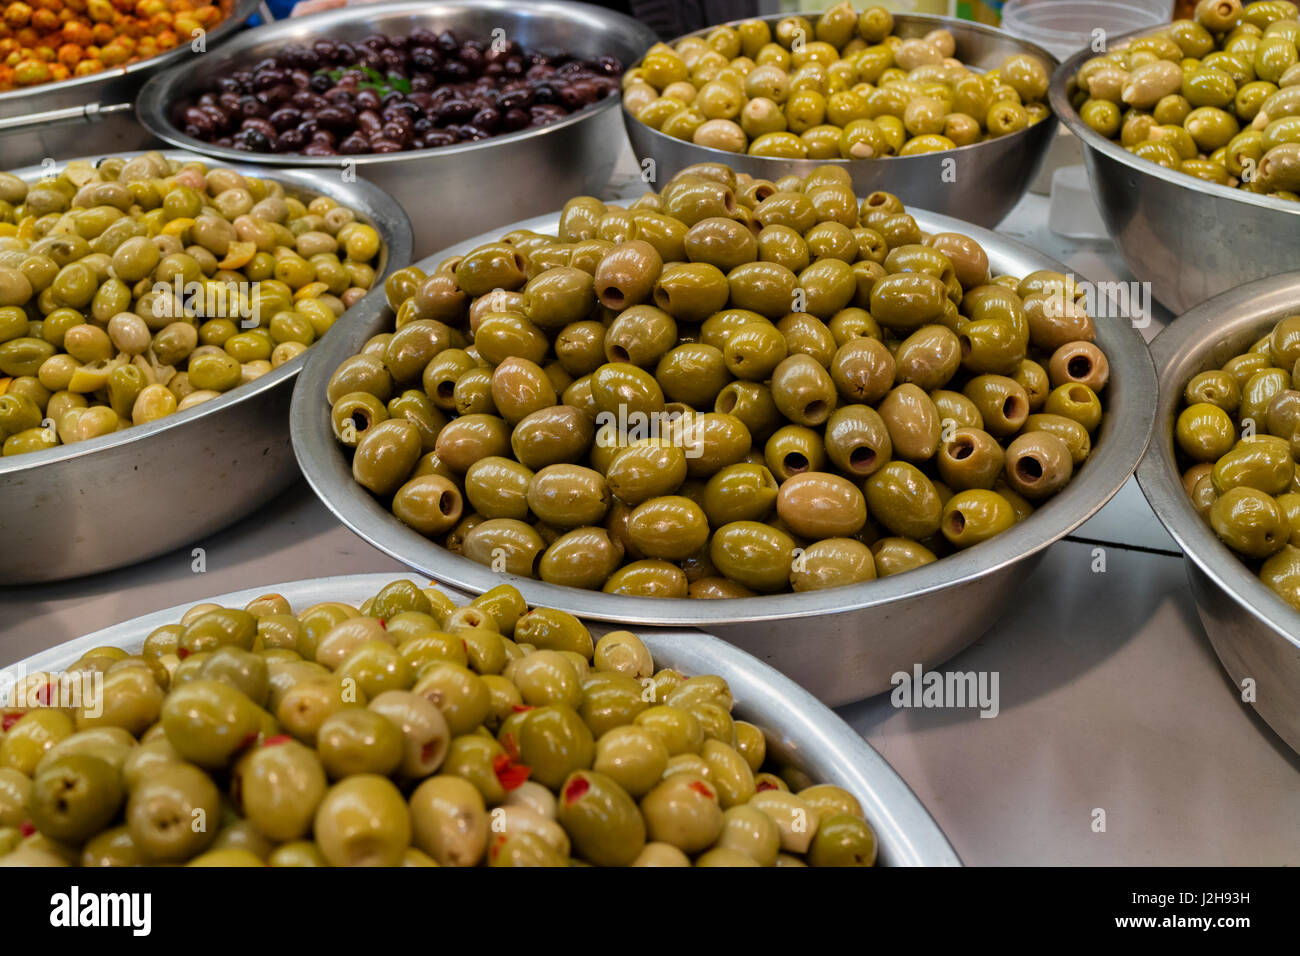 Bowls with different types of olives on the market Stock Photo